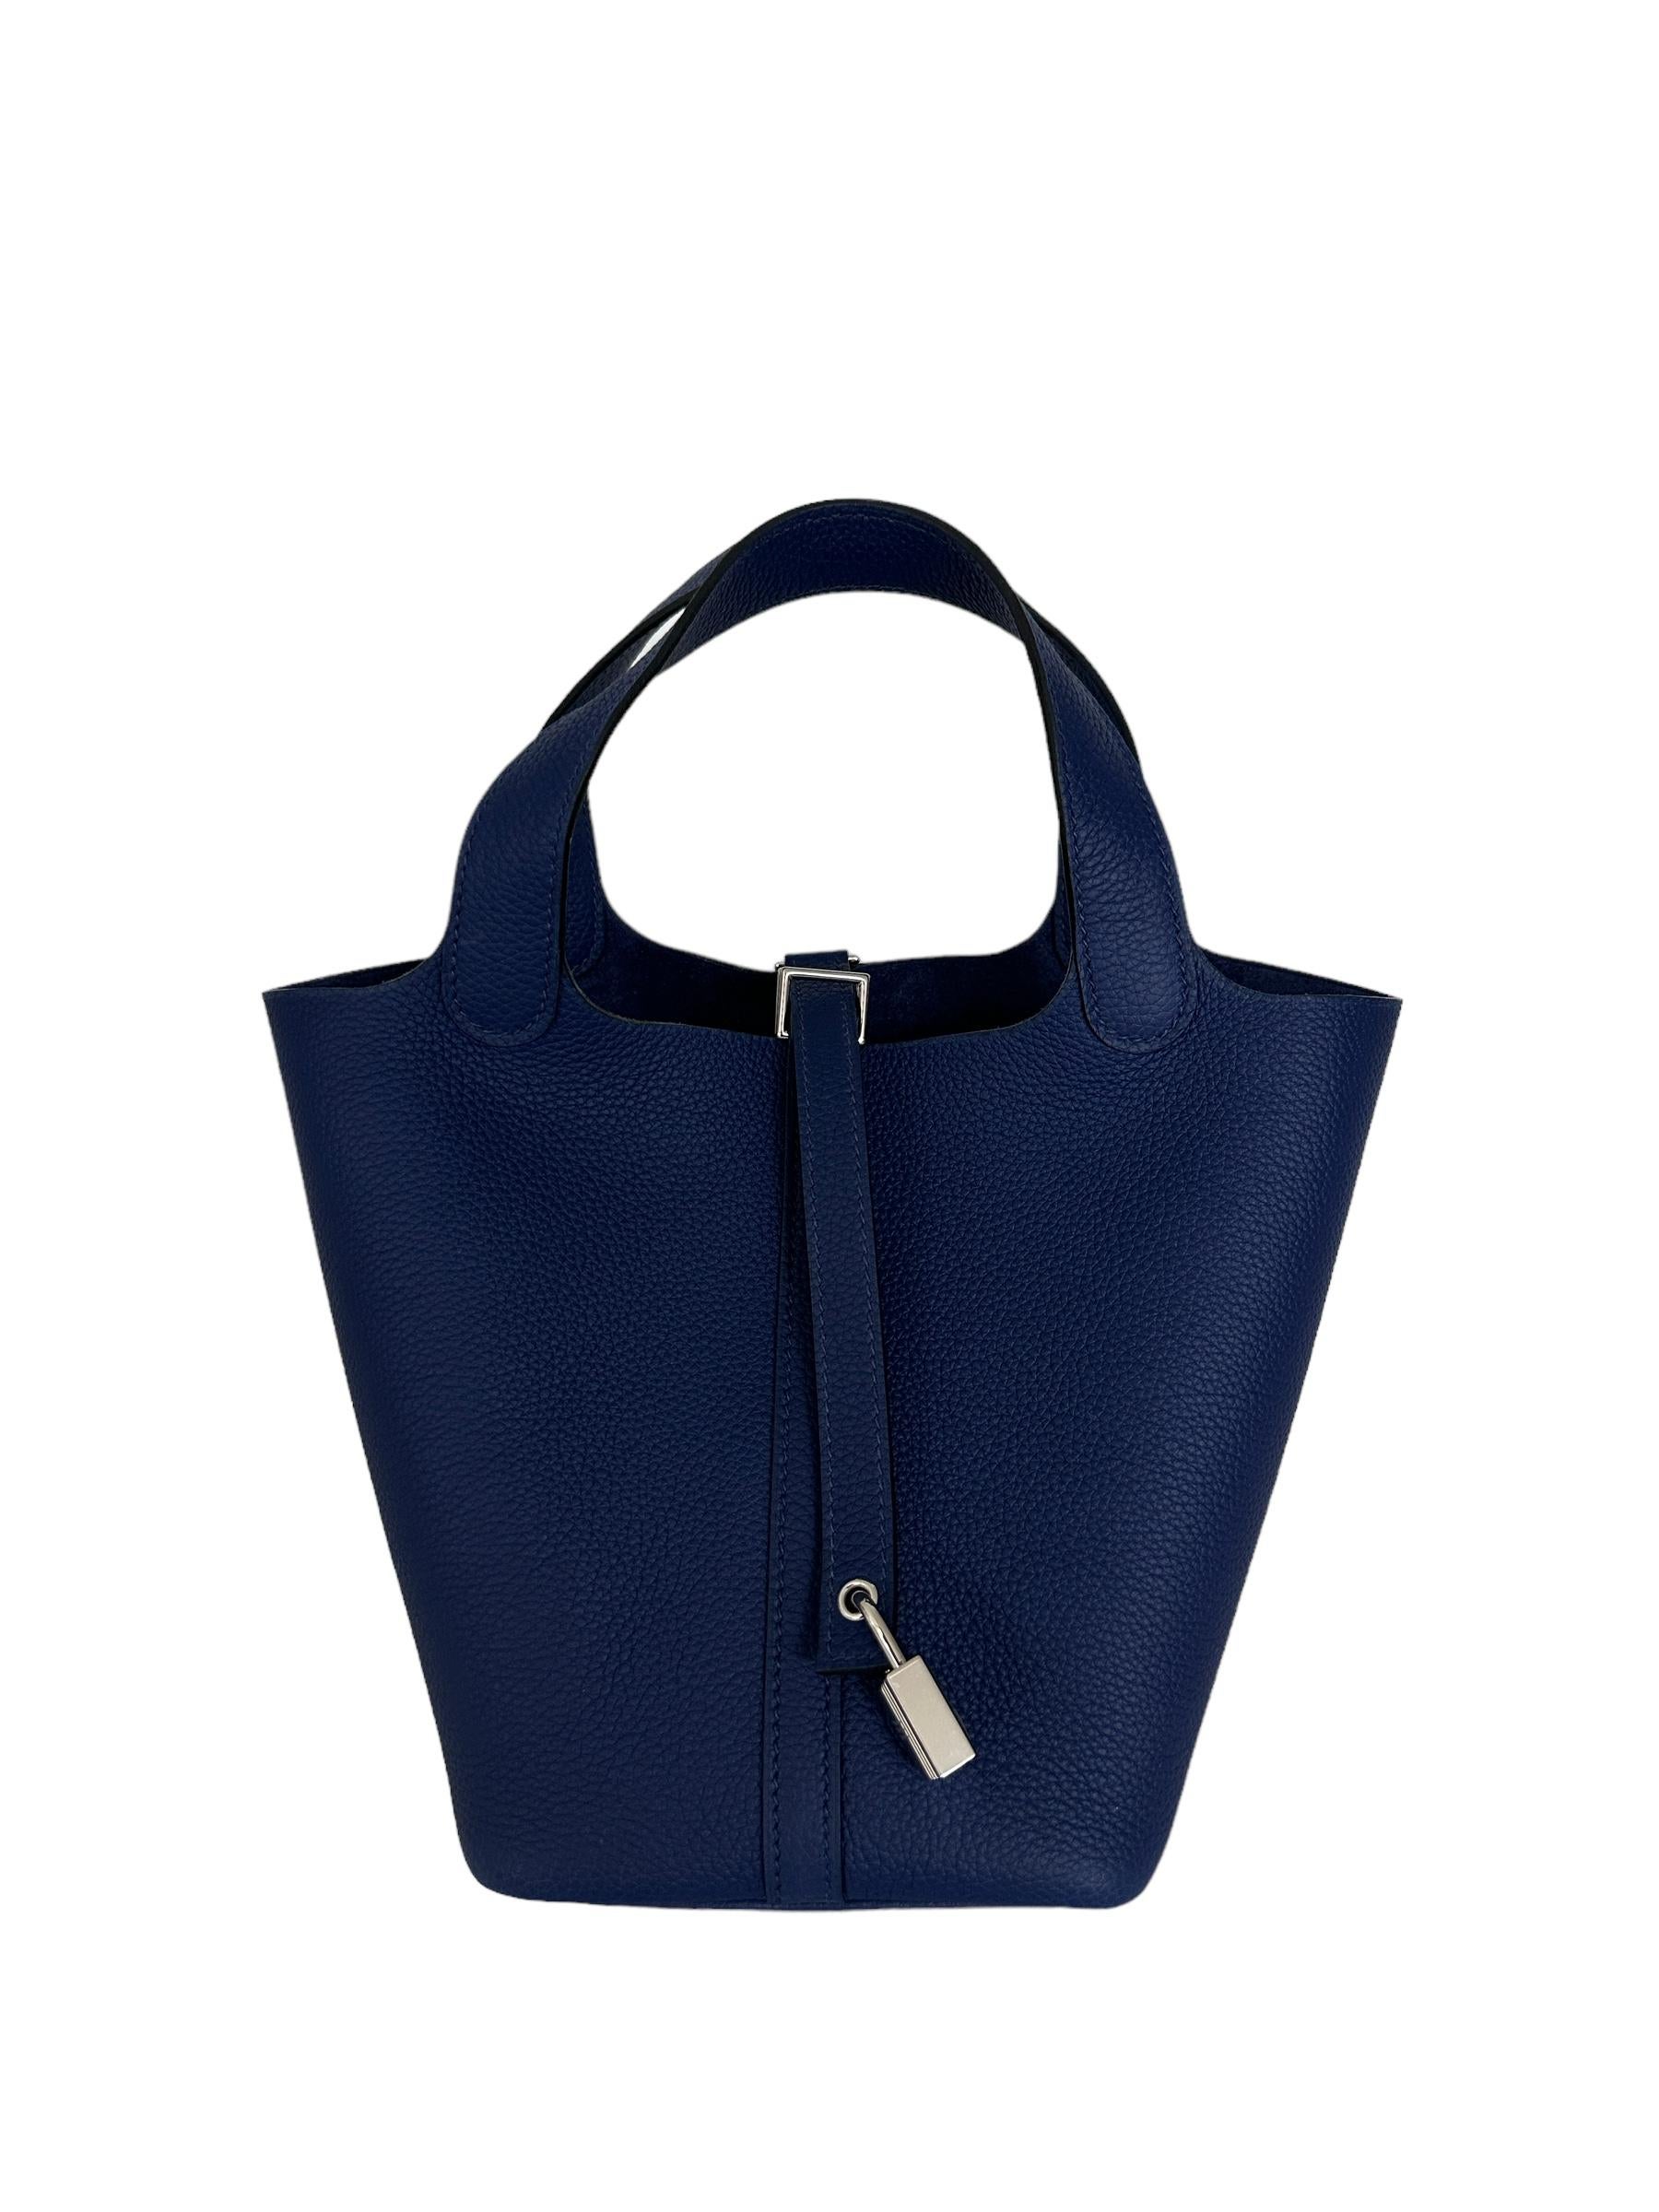 Hermes
Hermes Picotin Lock 18cm of Blue saphire leather with palladium hardware.
So Royal and Chic!
This Picotin Lock features tonal stitching with two top handles and a pull through closure on top.
Dress it up with your favorite scarf or charm, so